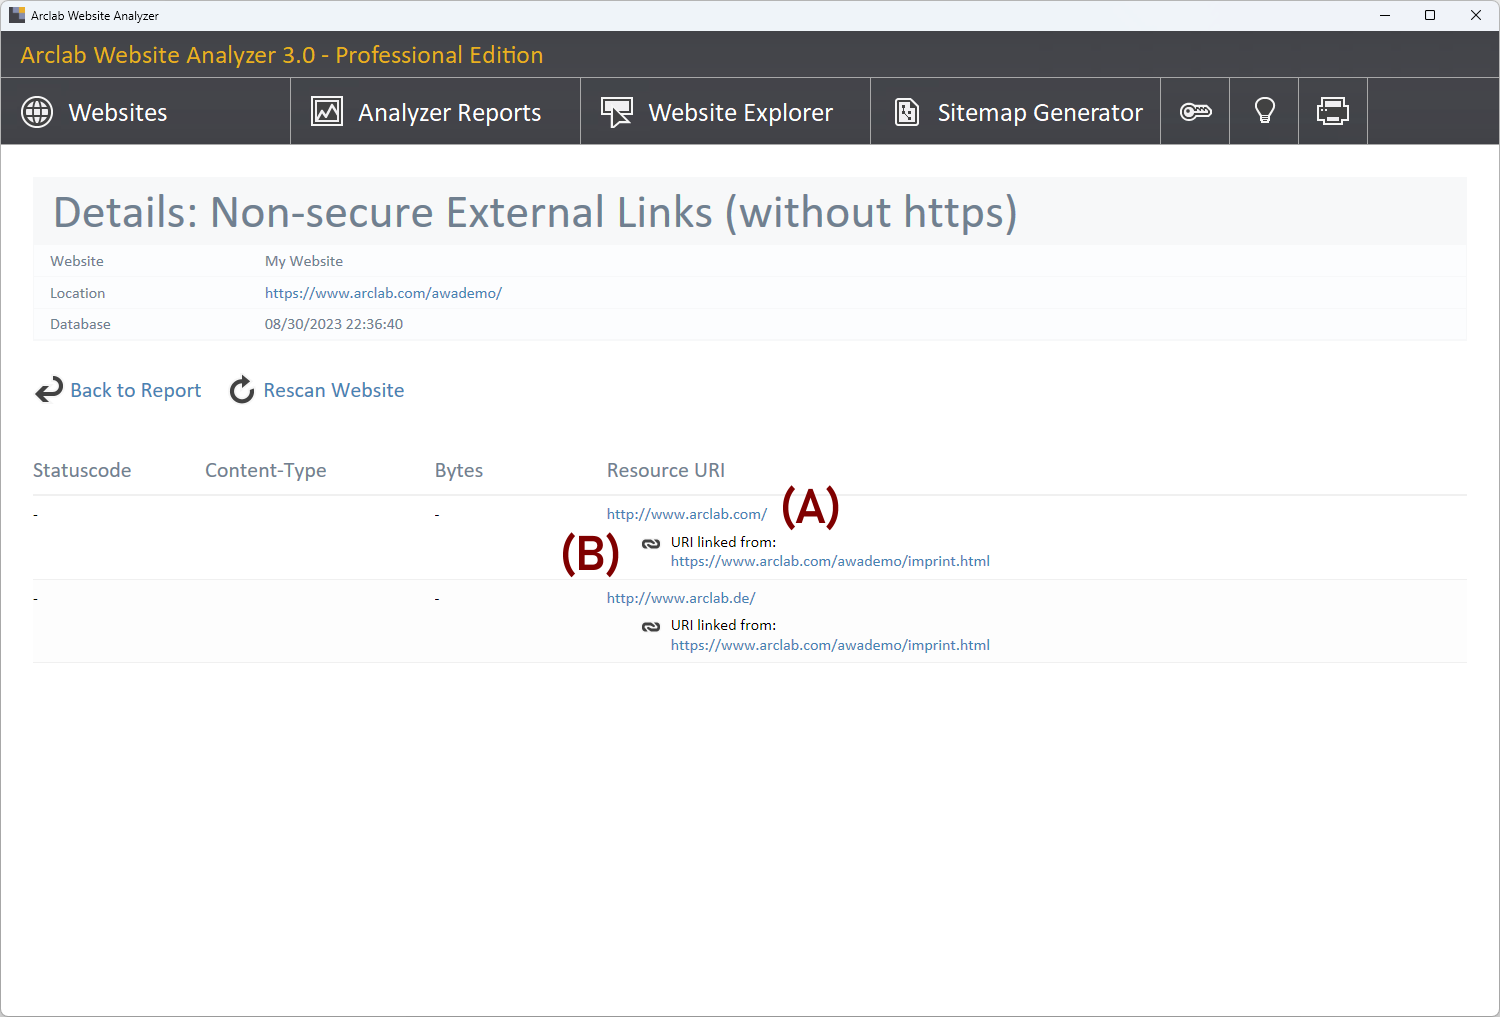 Details: Non-secure External Links (without https)